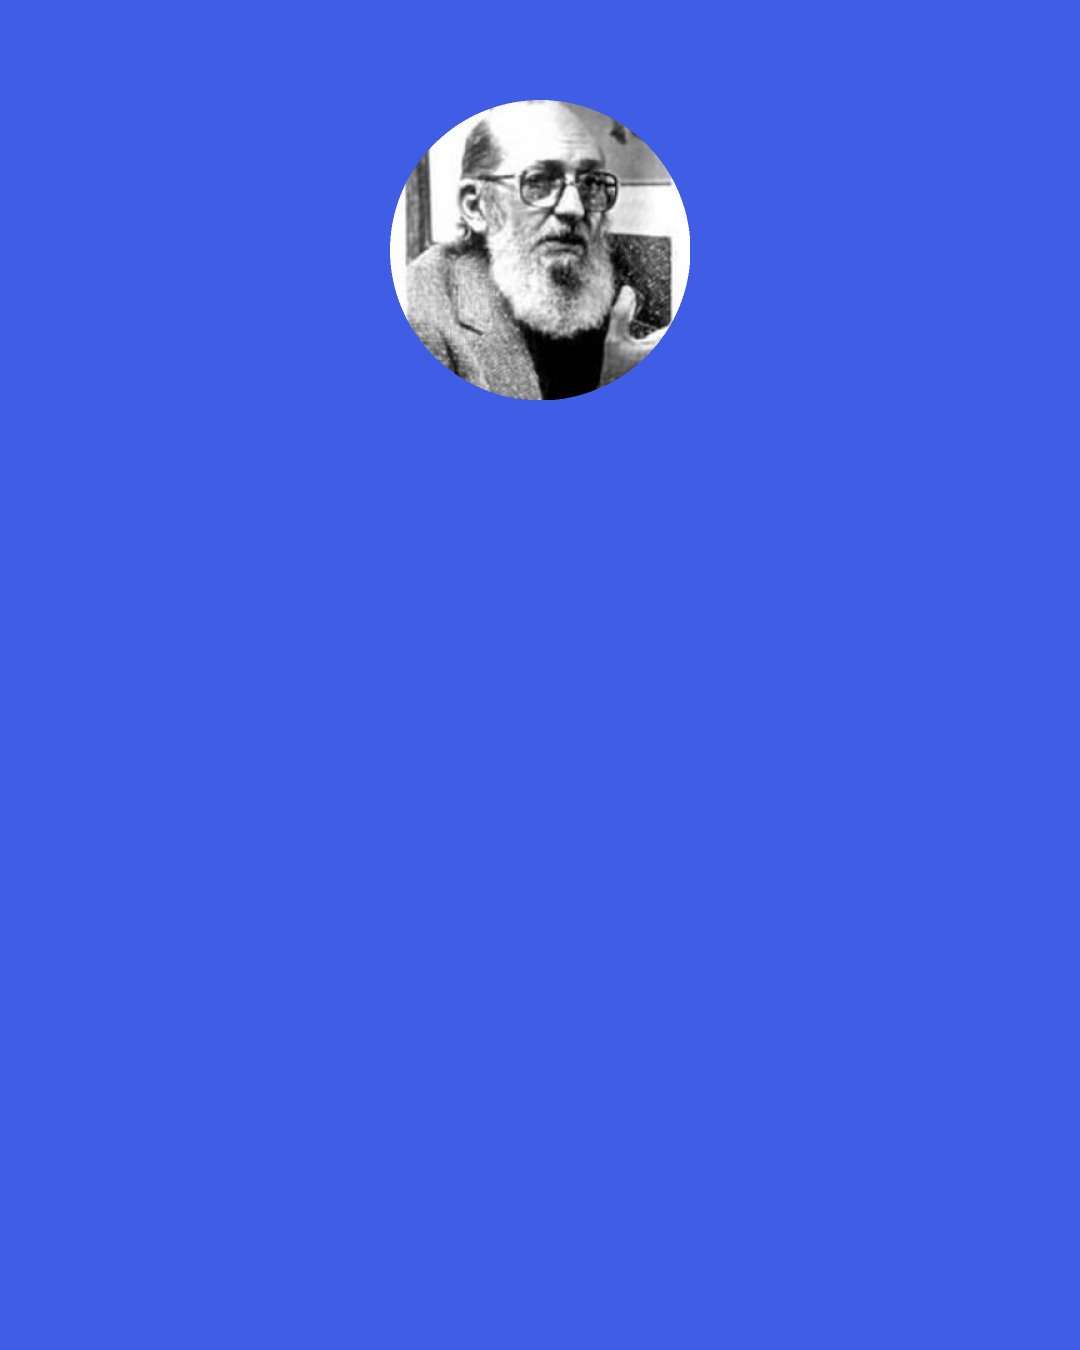 Paulo Freire: Critical reflection on practice is a requirement of the relationship between theory and practice. Otherwise theory becomes simply "blah, blah, blah, " and practice, pure activism.